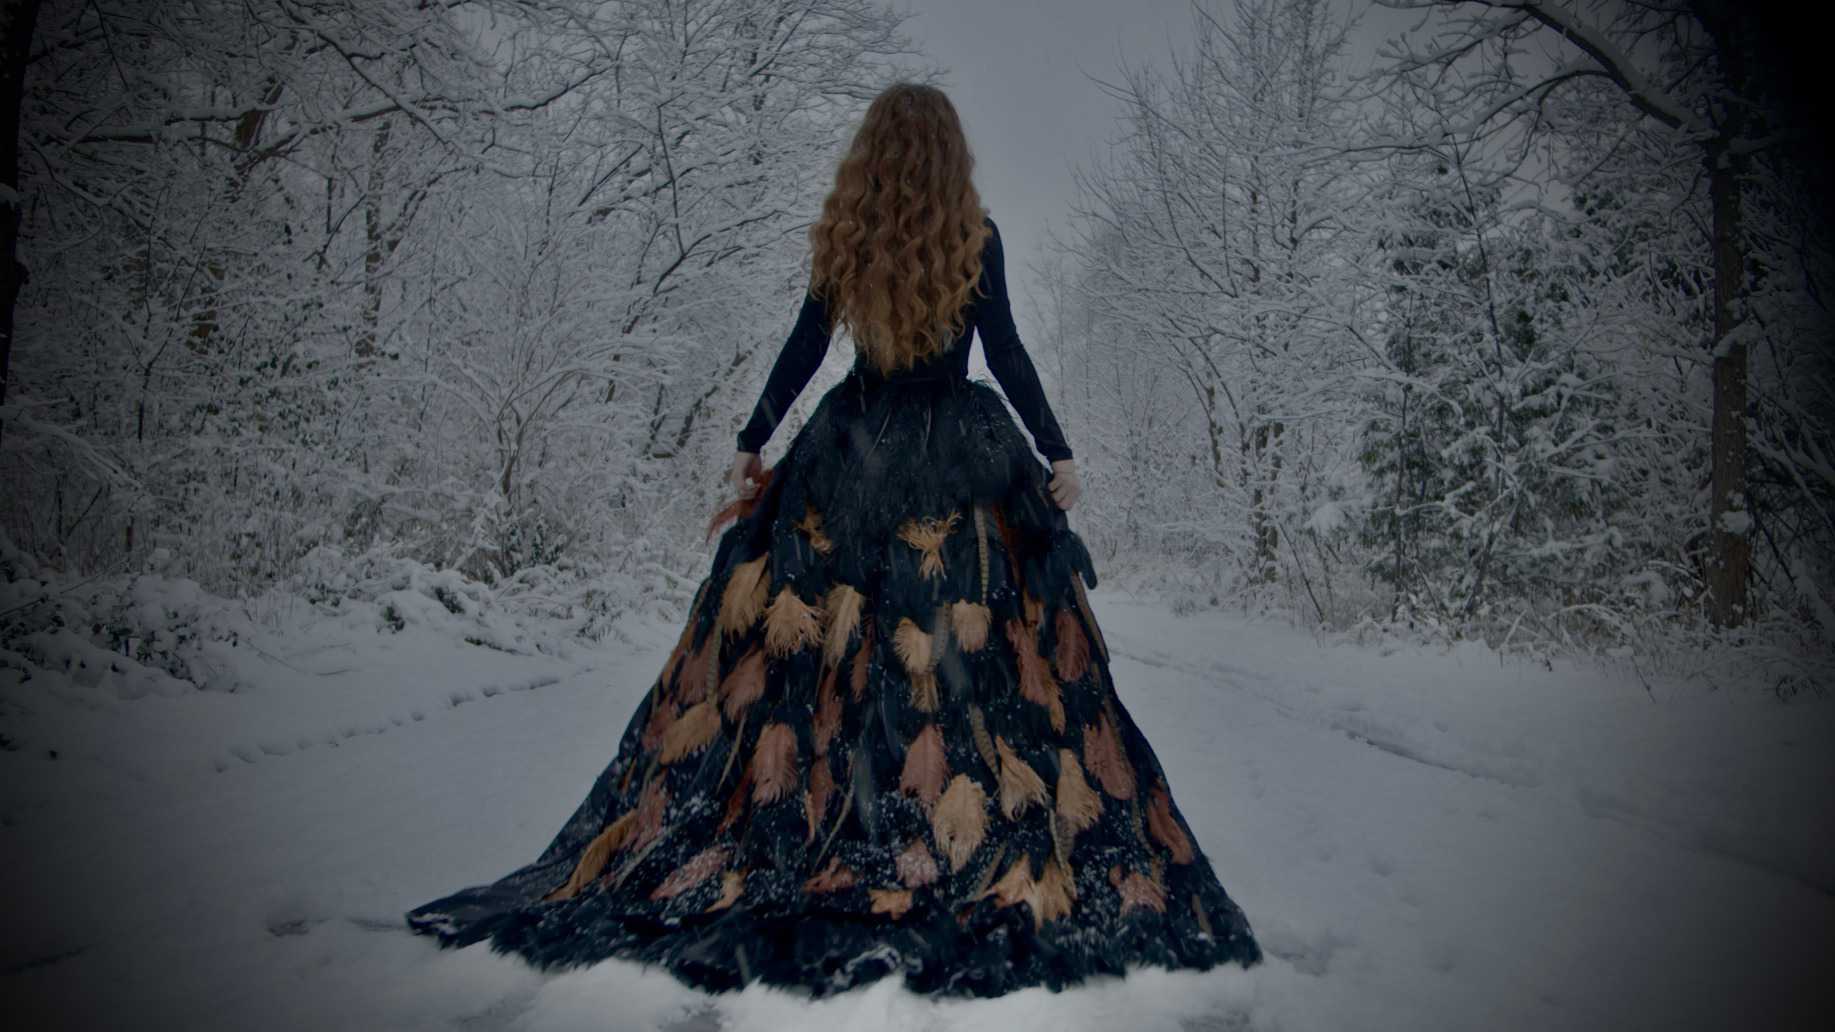 Alaina in a flowing dress standing in the forest in the snow.